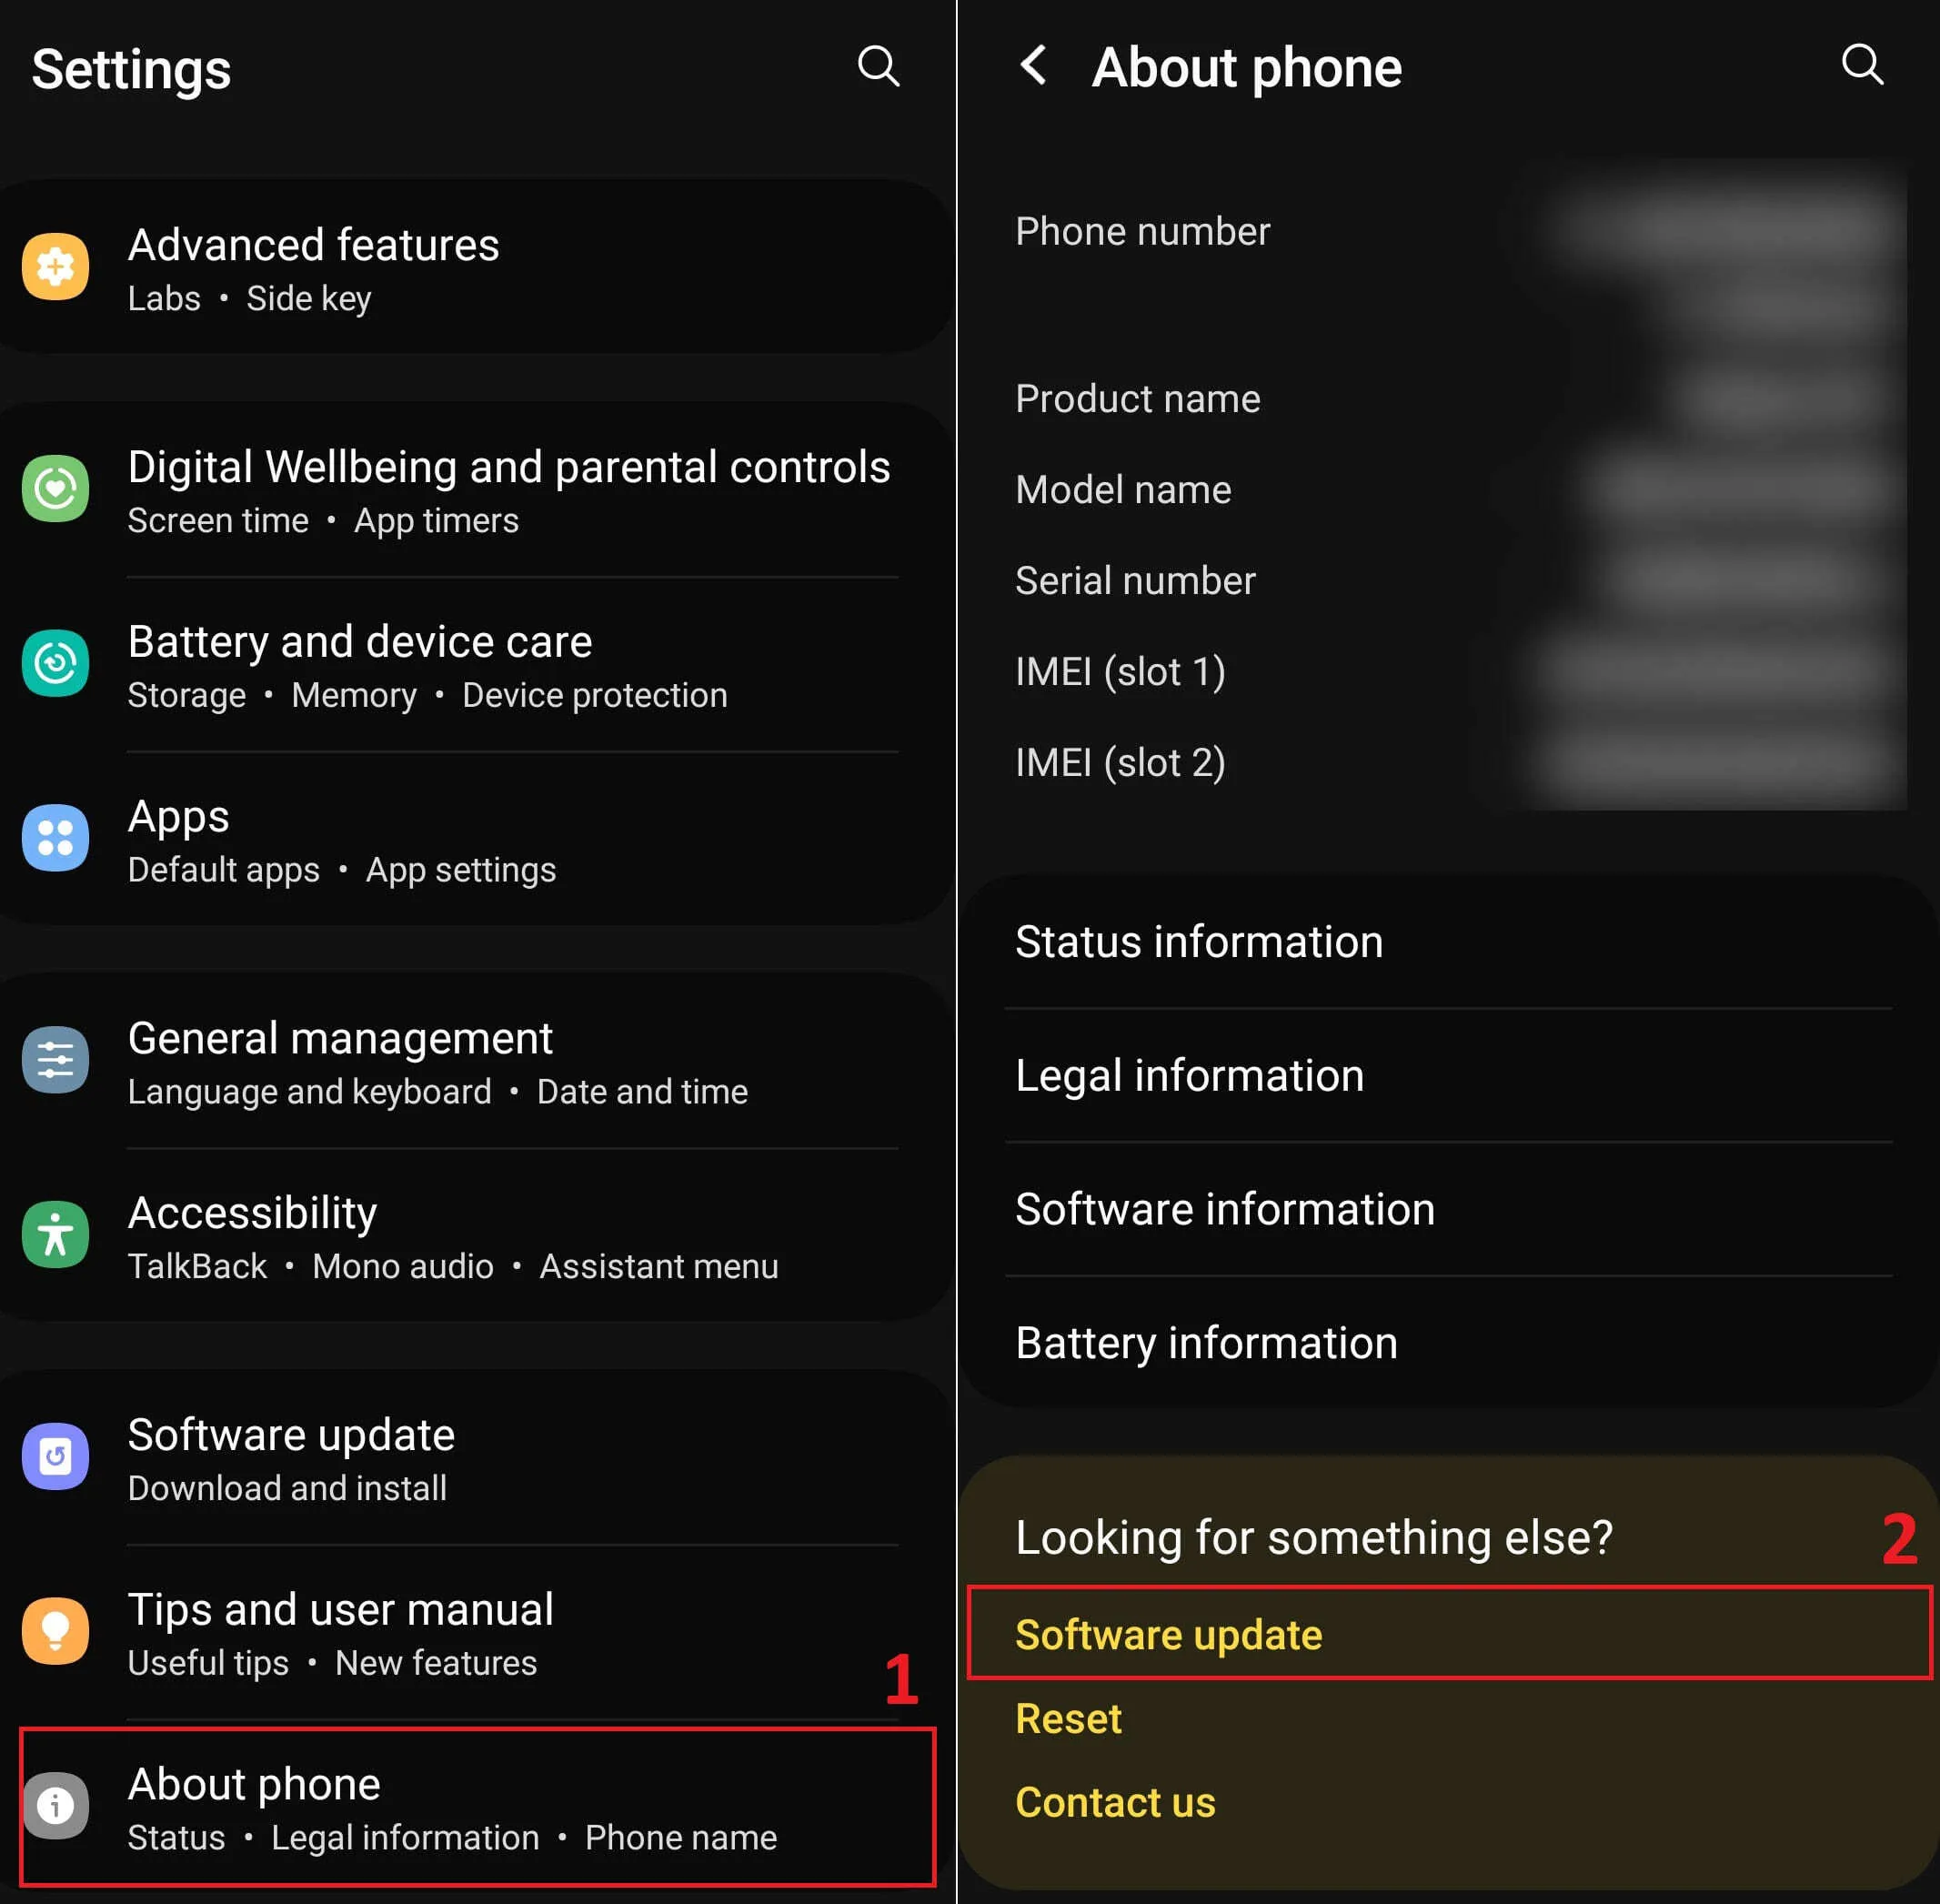 Access settings for Android update